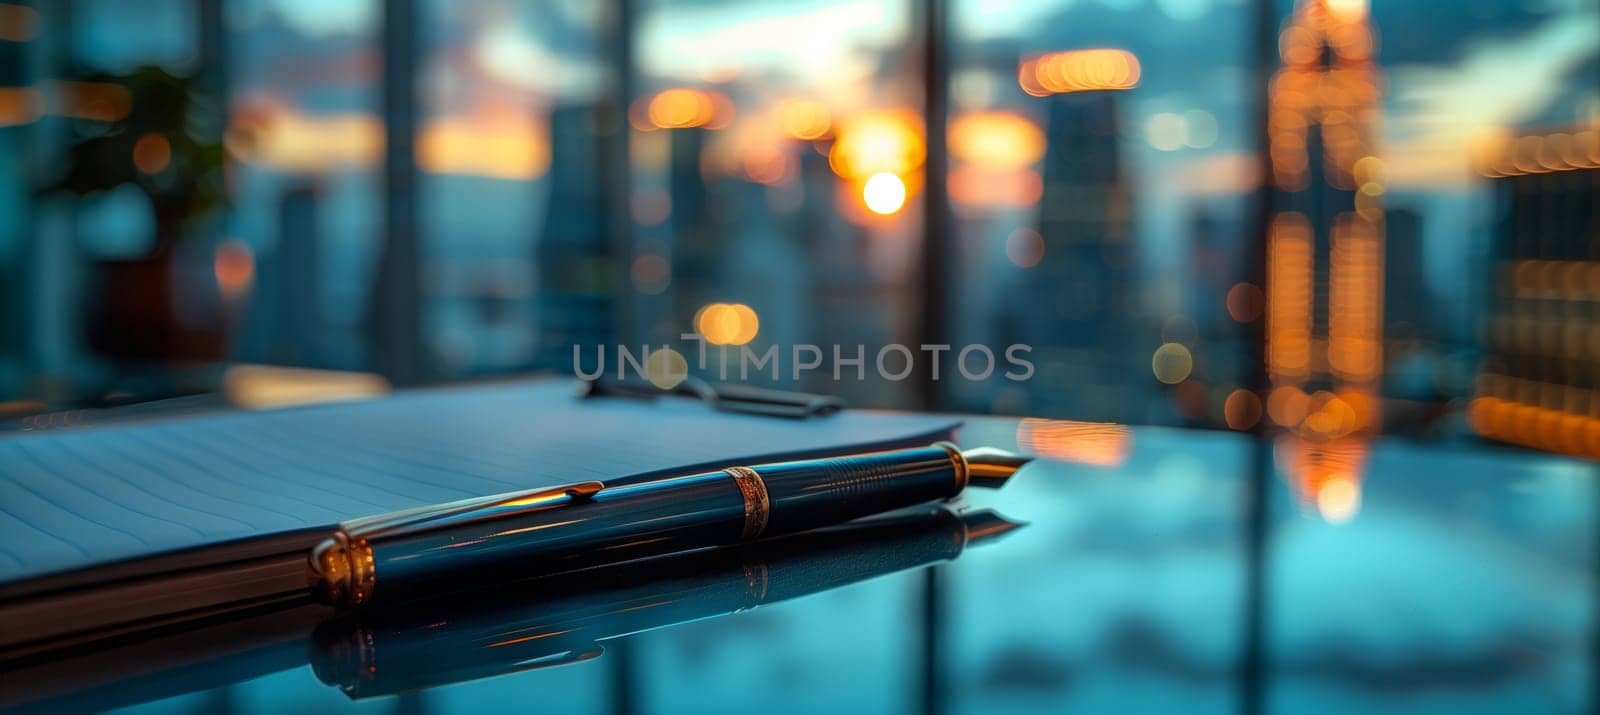 A wooden table by the window displays a notebook and a pen. The cityscape is reflected on the glass, with tints and shades creating a beautiful scene